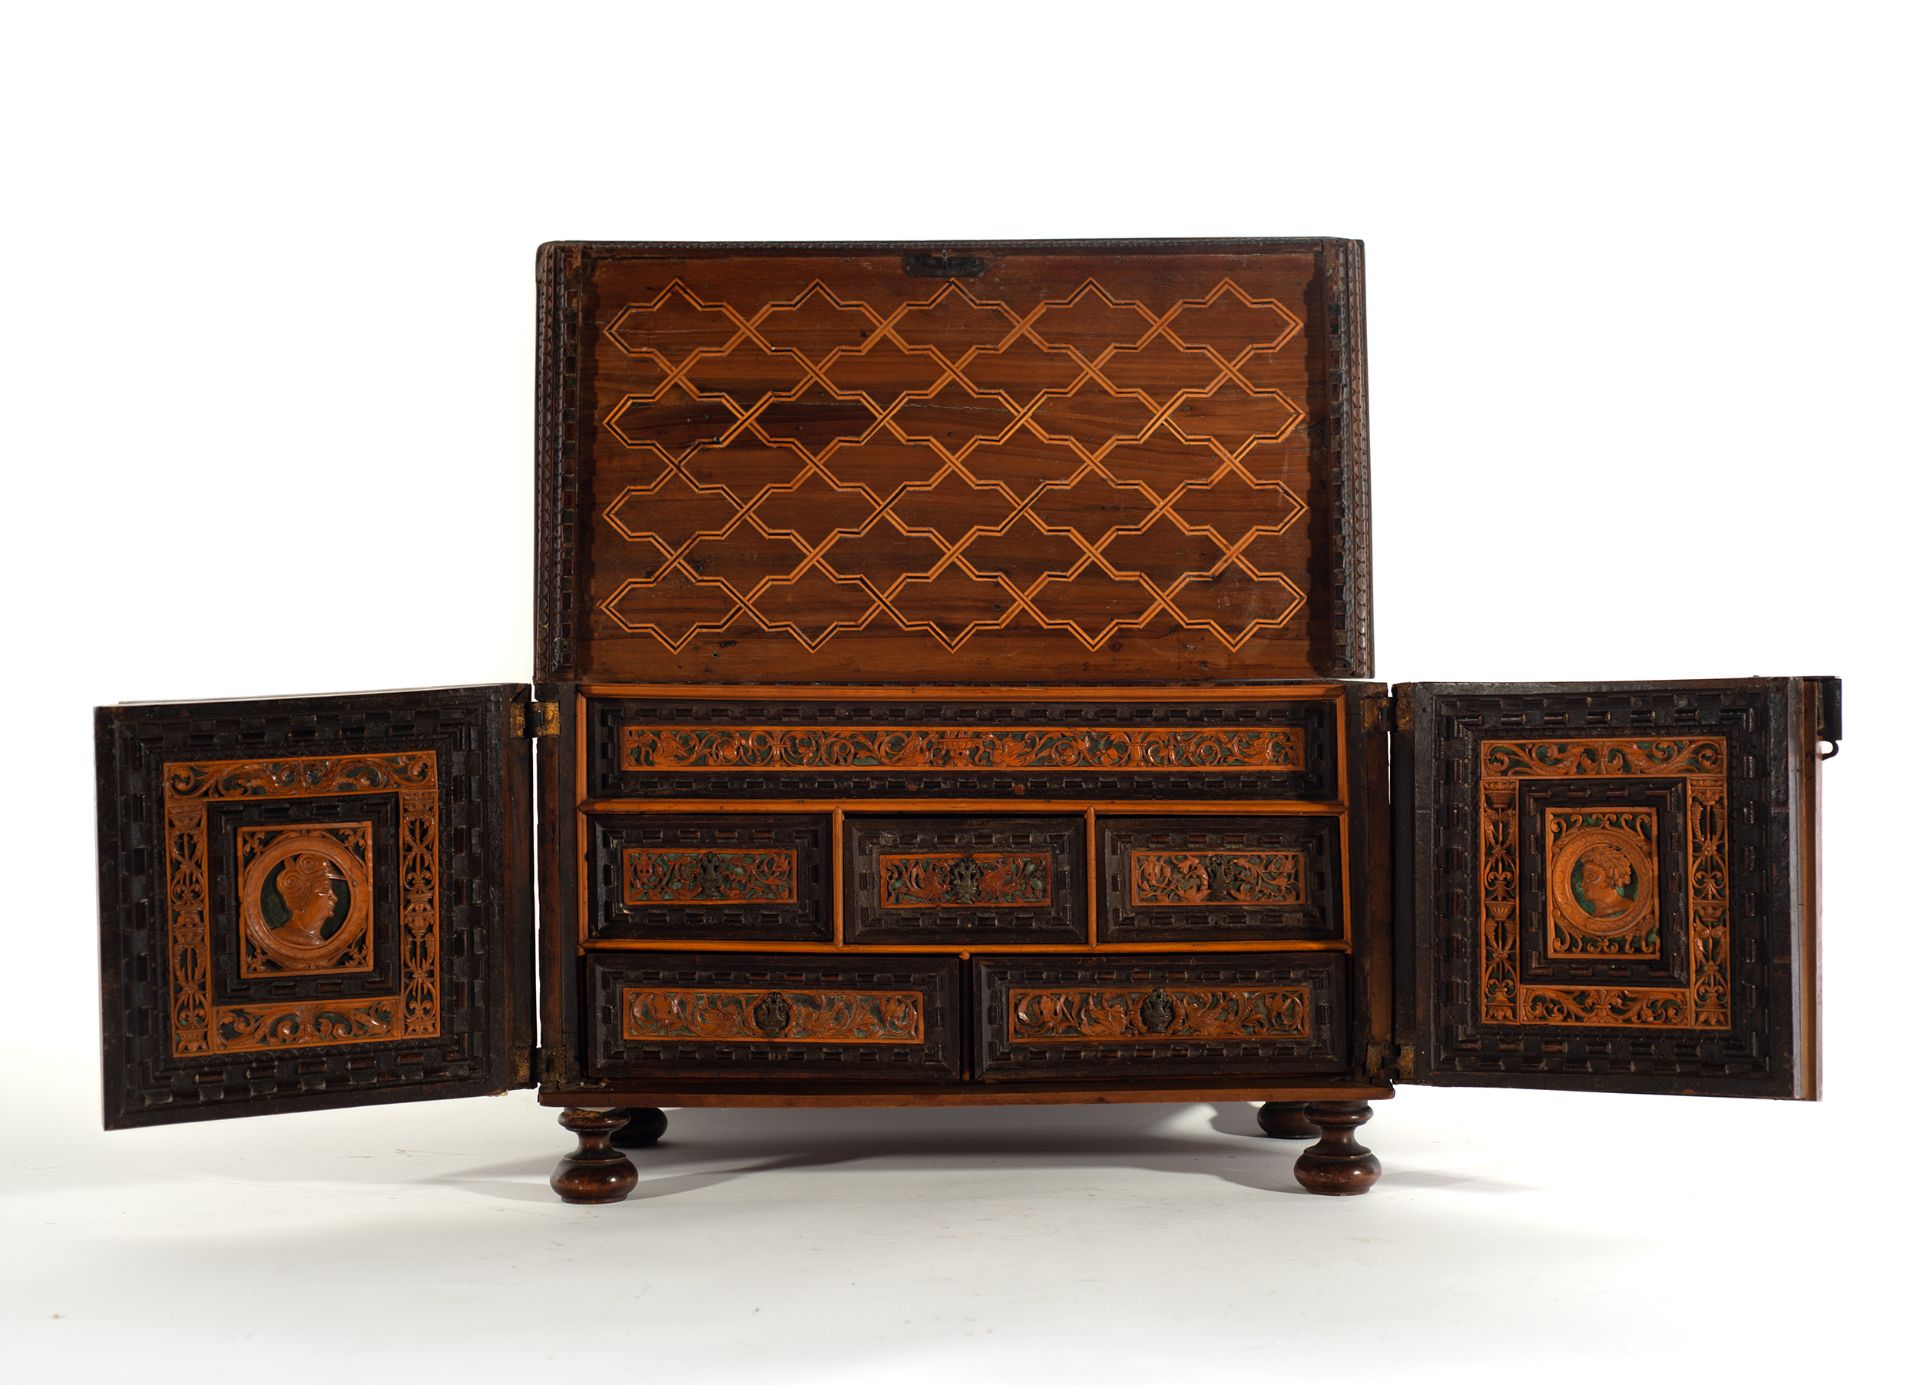 Exceptional plateresque chest in fruit wood, boxwood and marquetry, Spanish Renaissance, mid-16th ce - Image 4 of 13